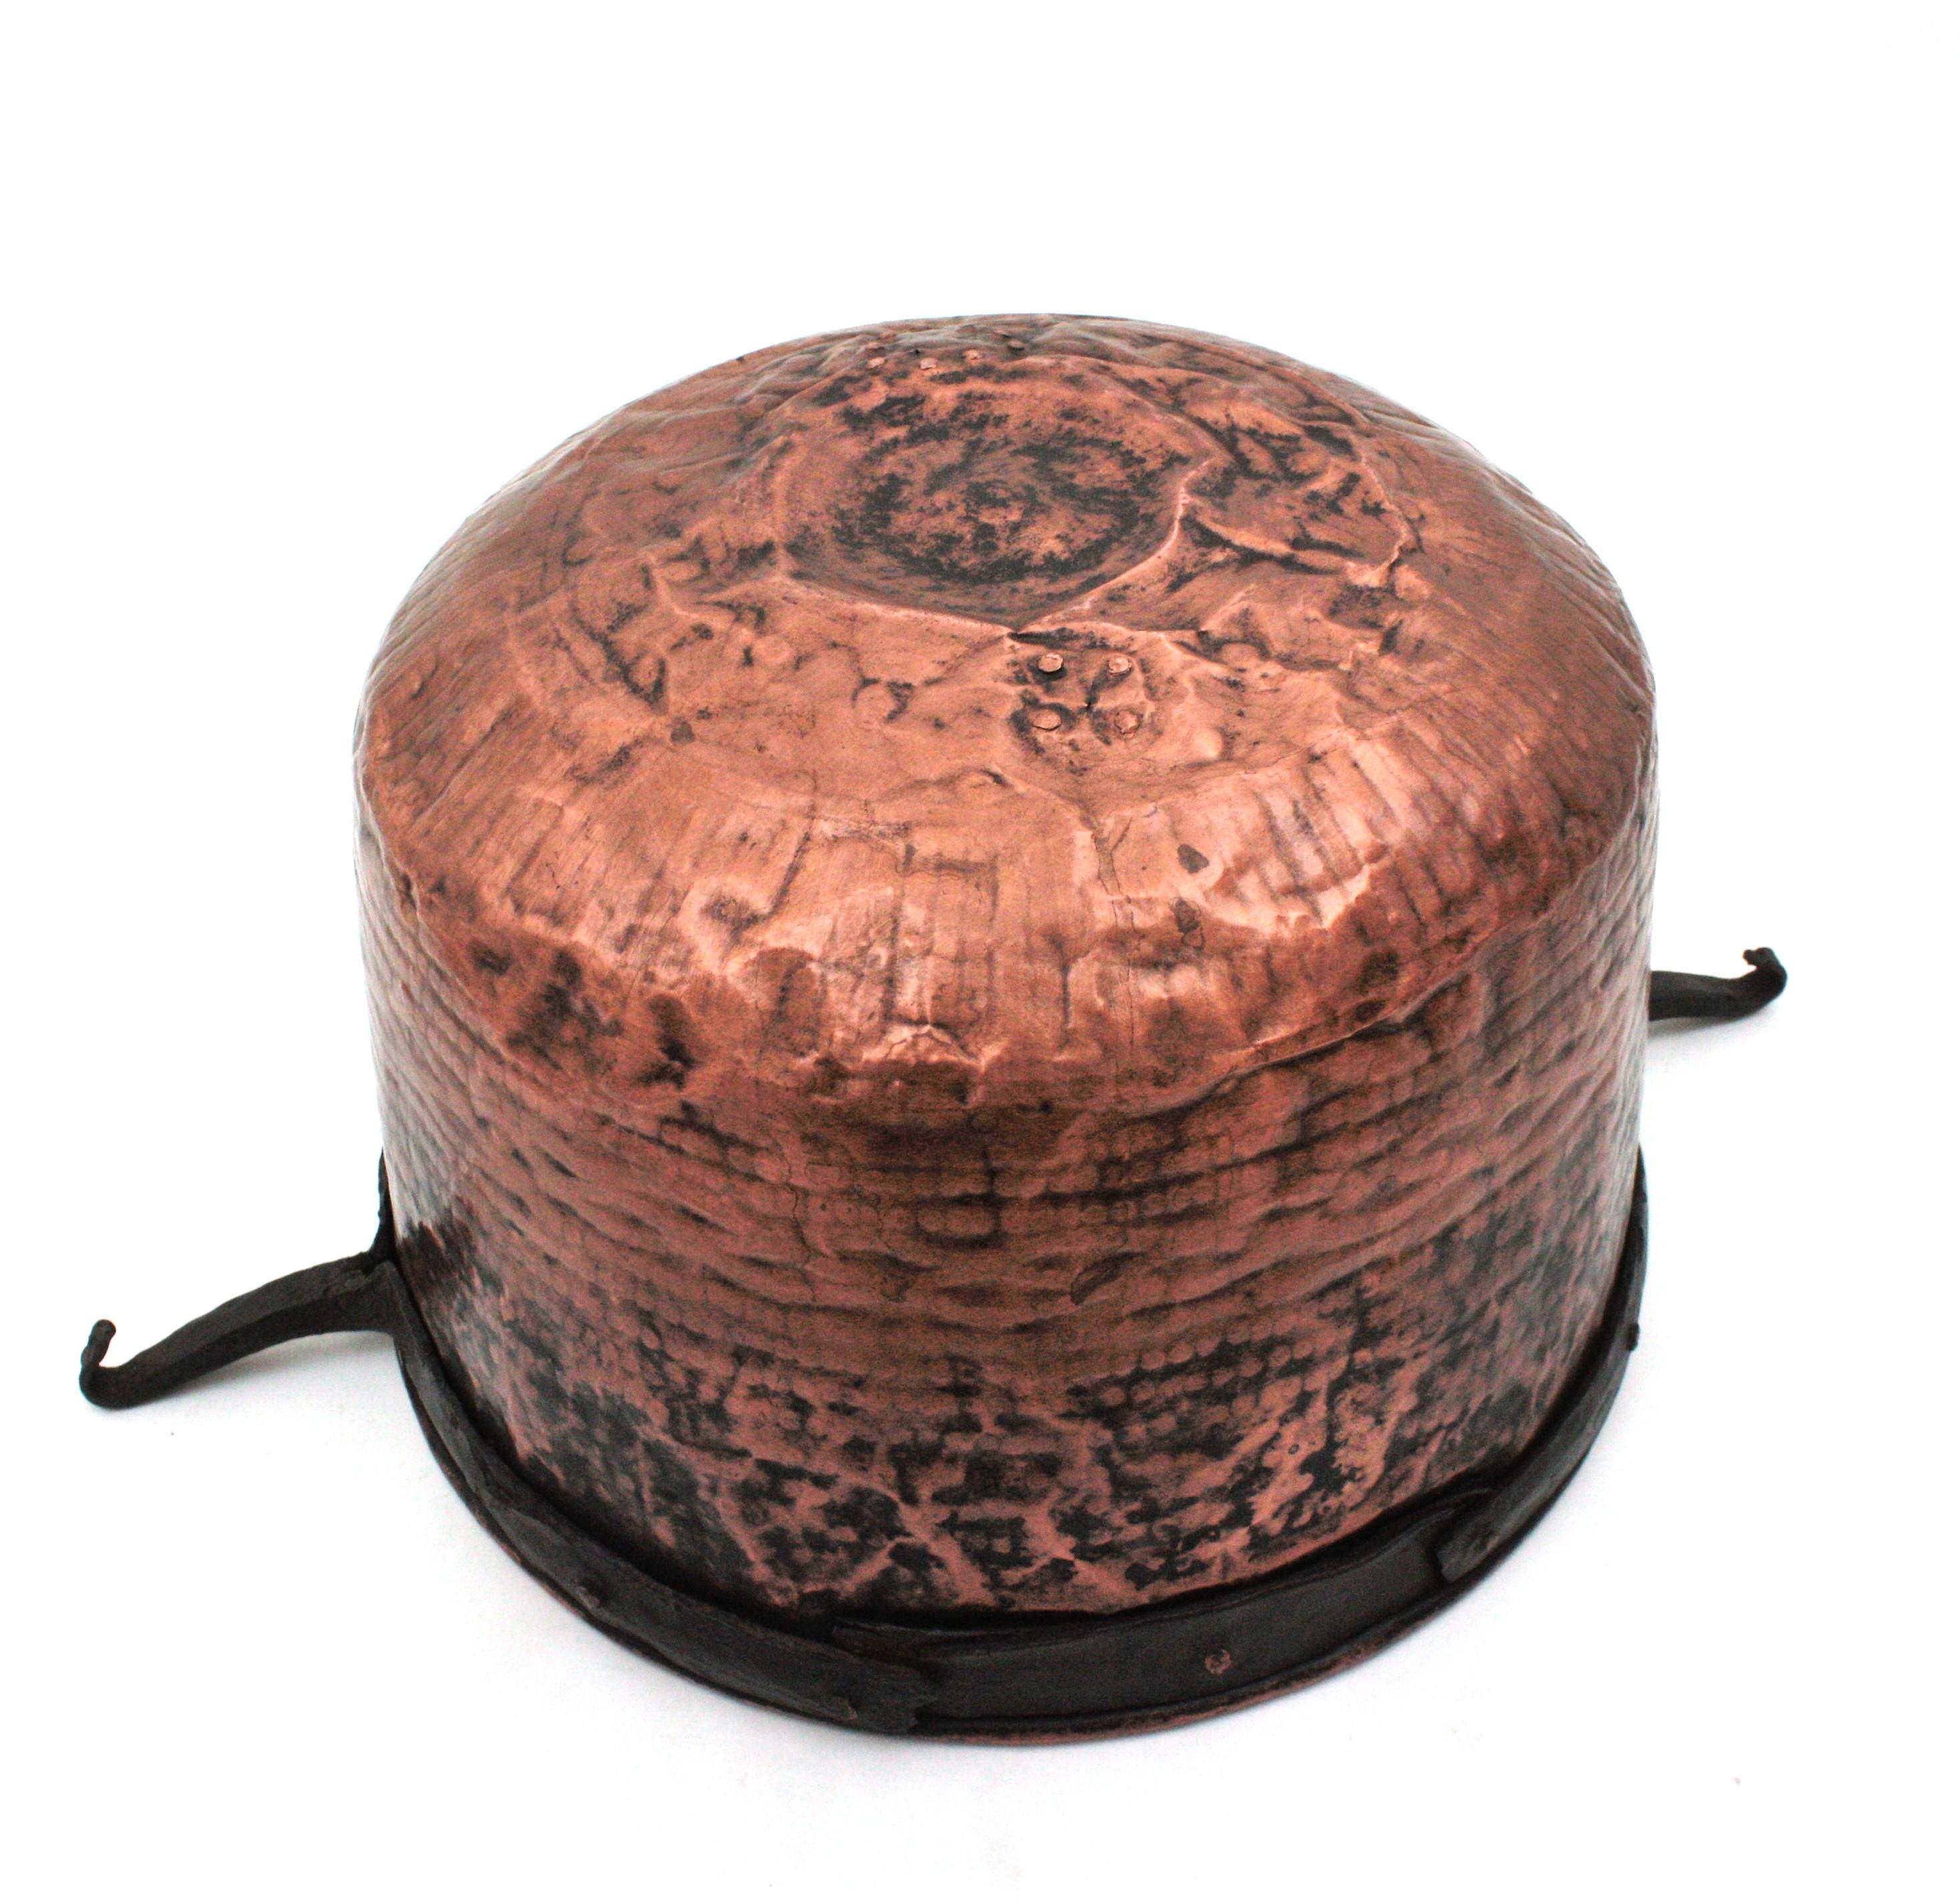 Massive Spanish Copper Cauldron with Iron Hook Handles For Sale 7